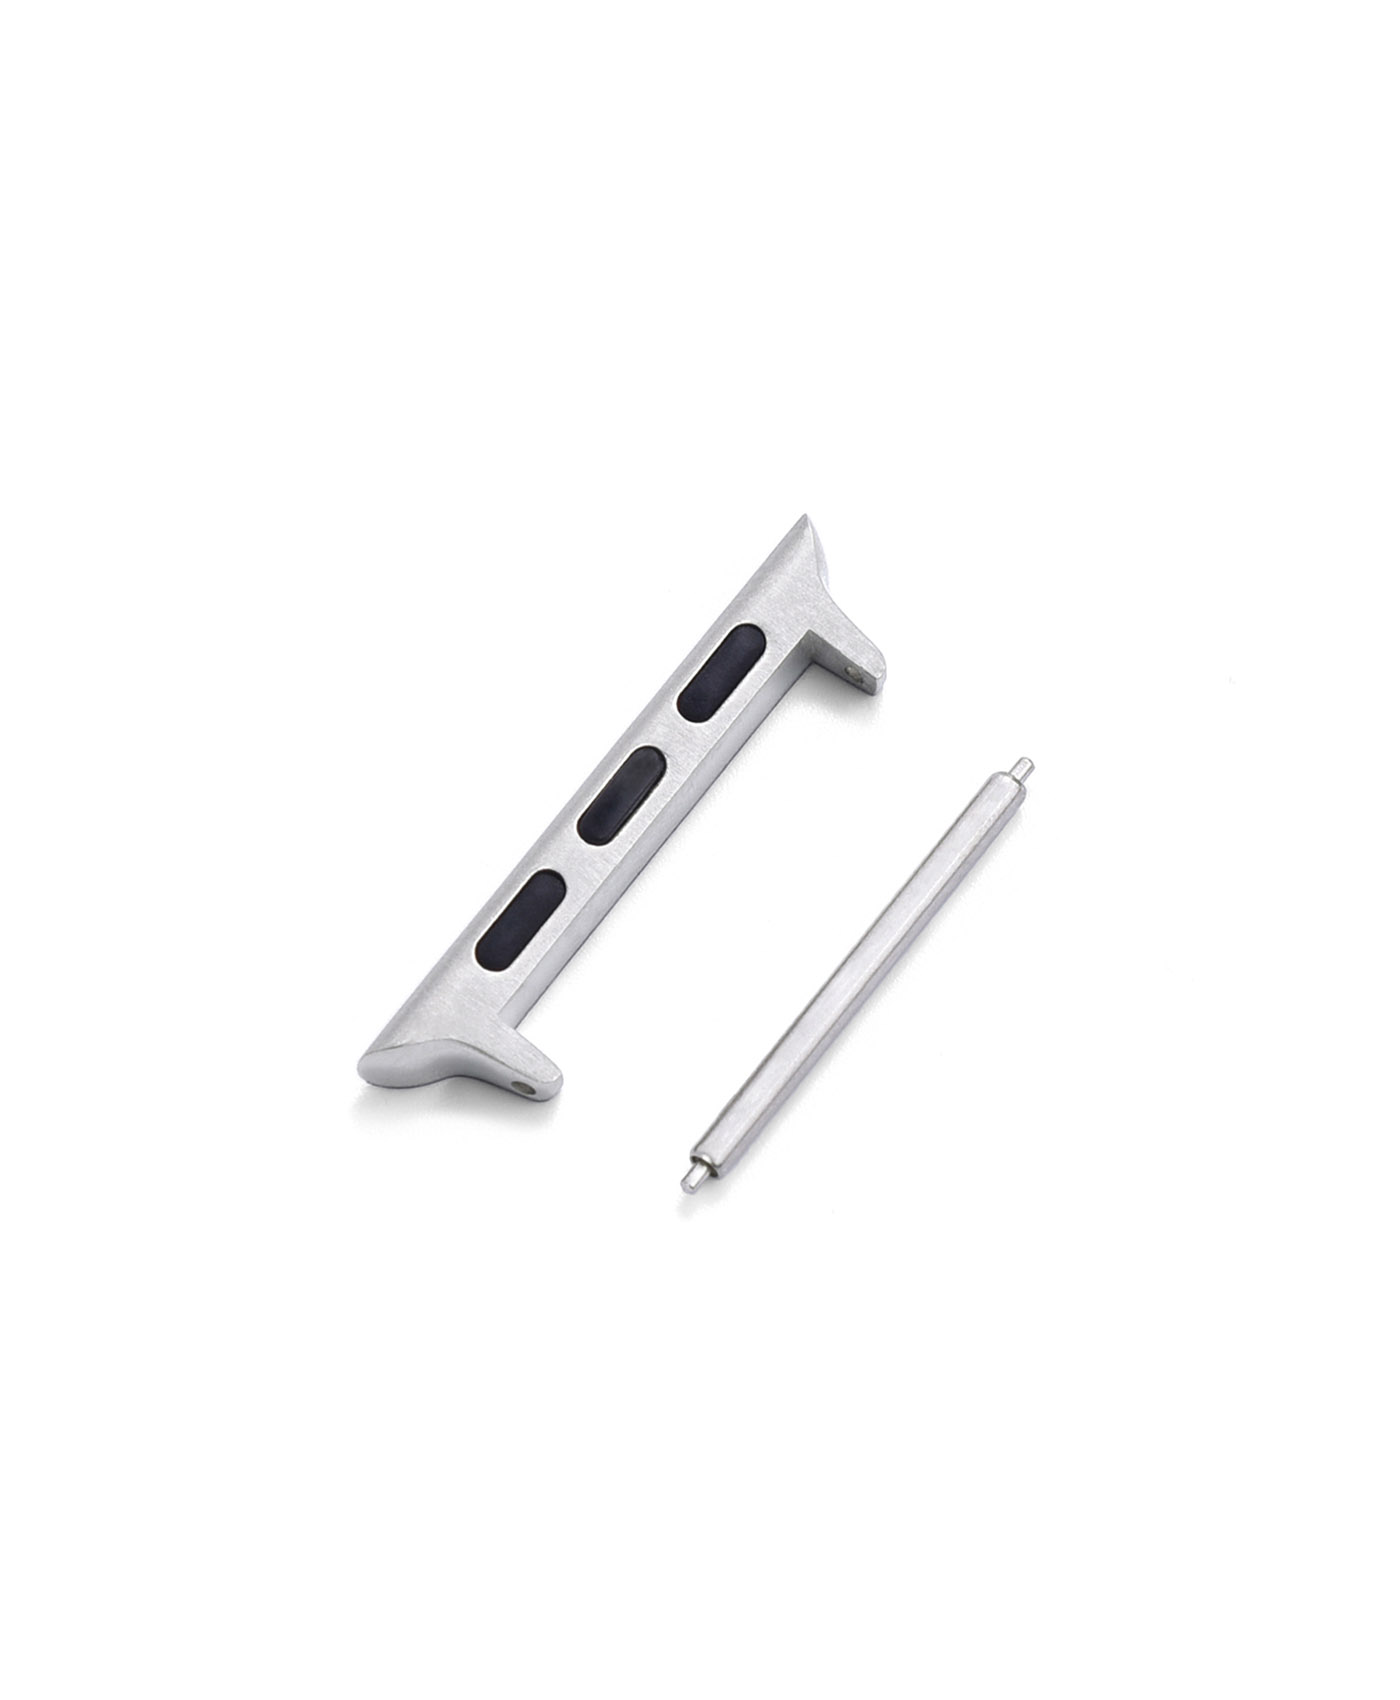 Strap Adapters for Apple Watch - Silver 2